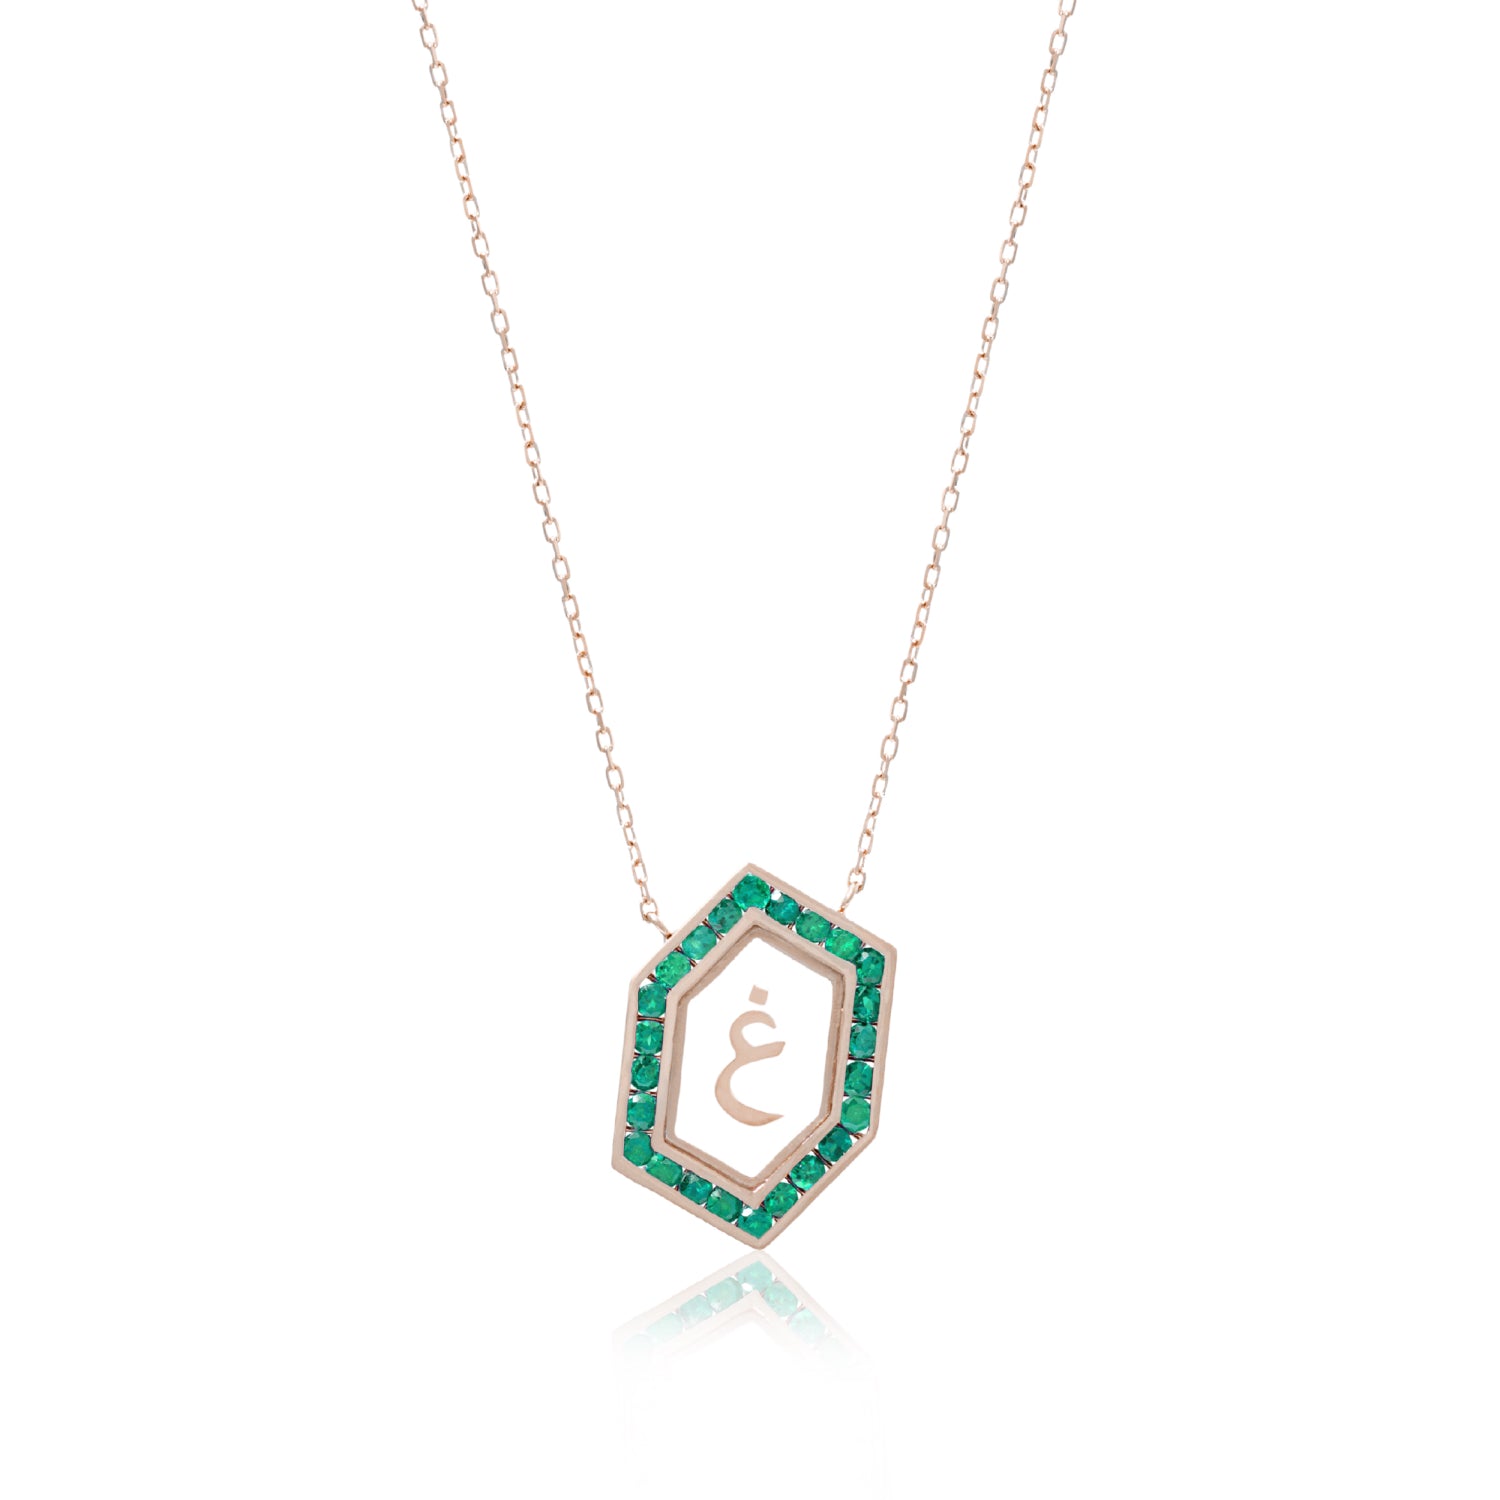 Qamoos 1.0 Letter غ Emerald Necklace in Rose Gold